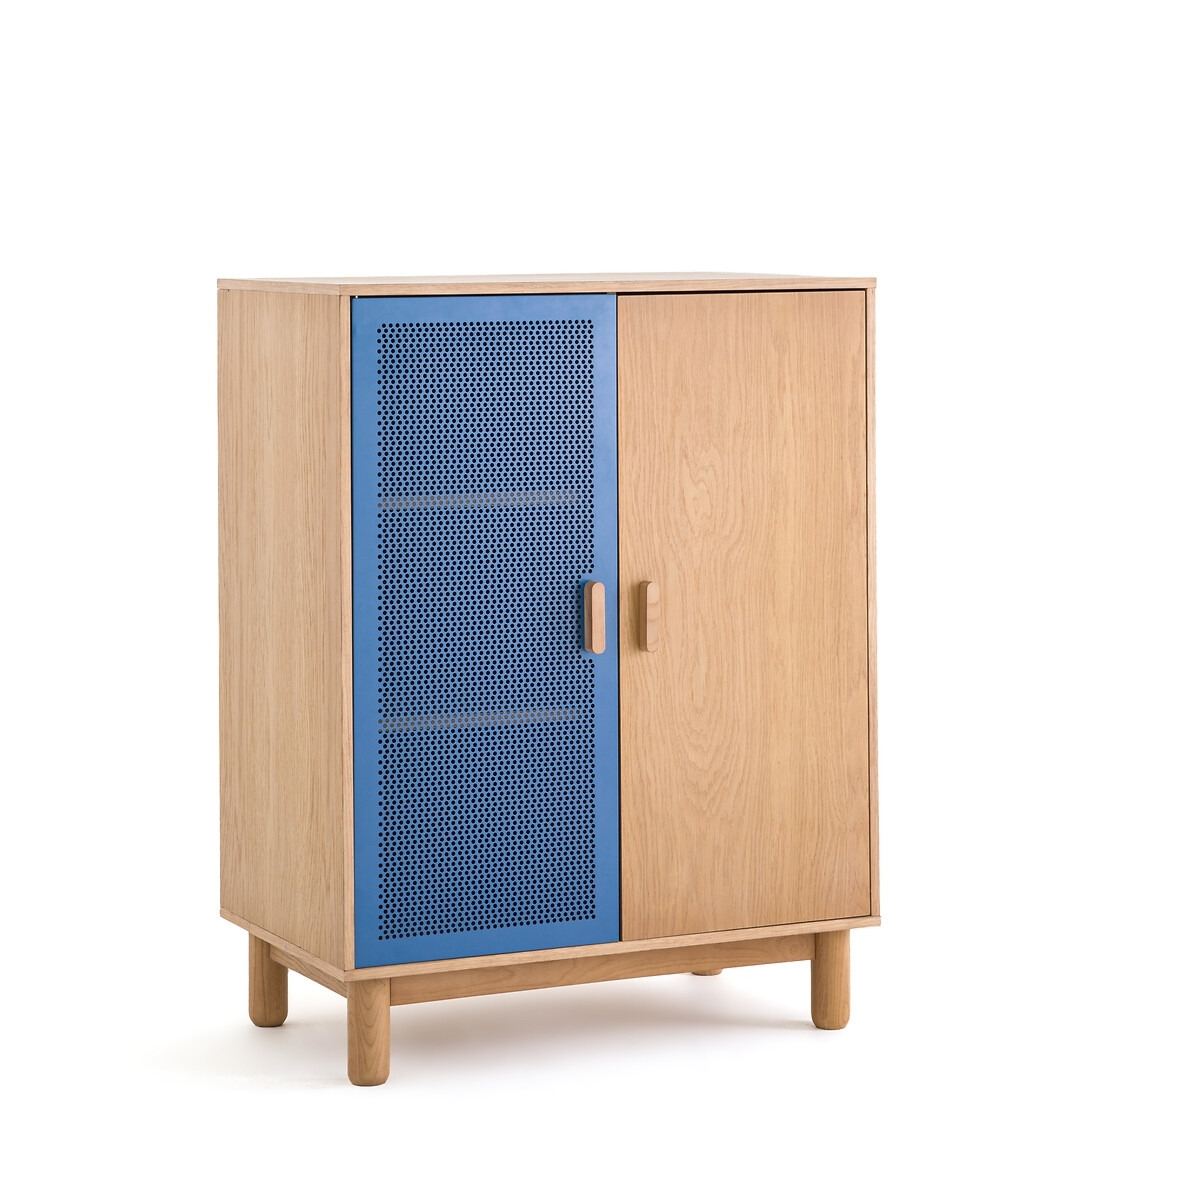 Urby Low Double Wardrobe - image 1